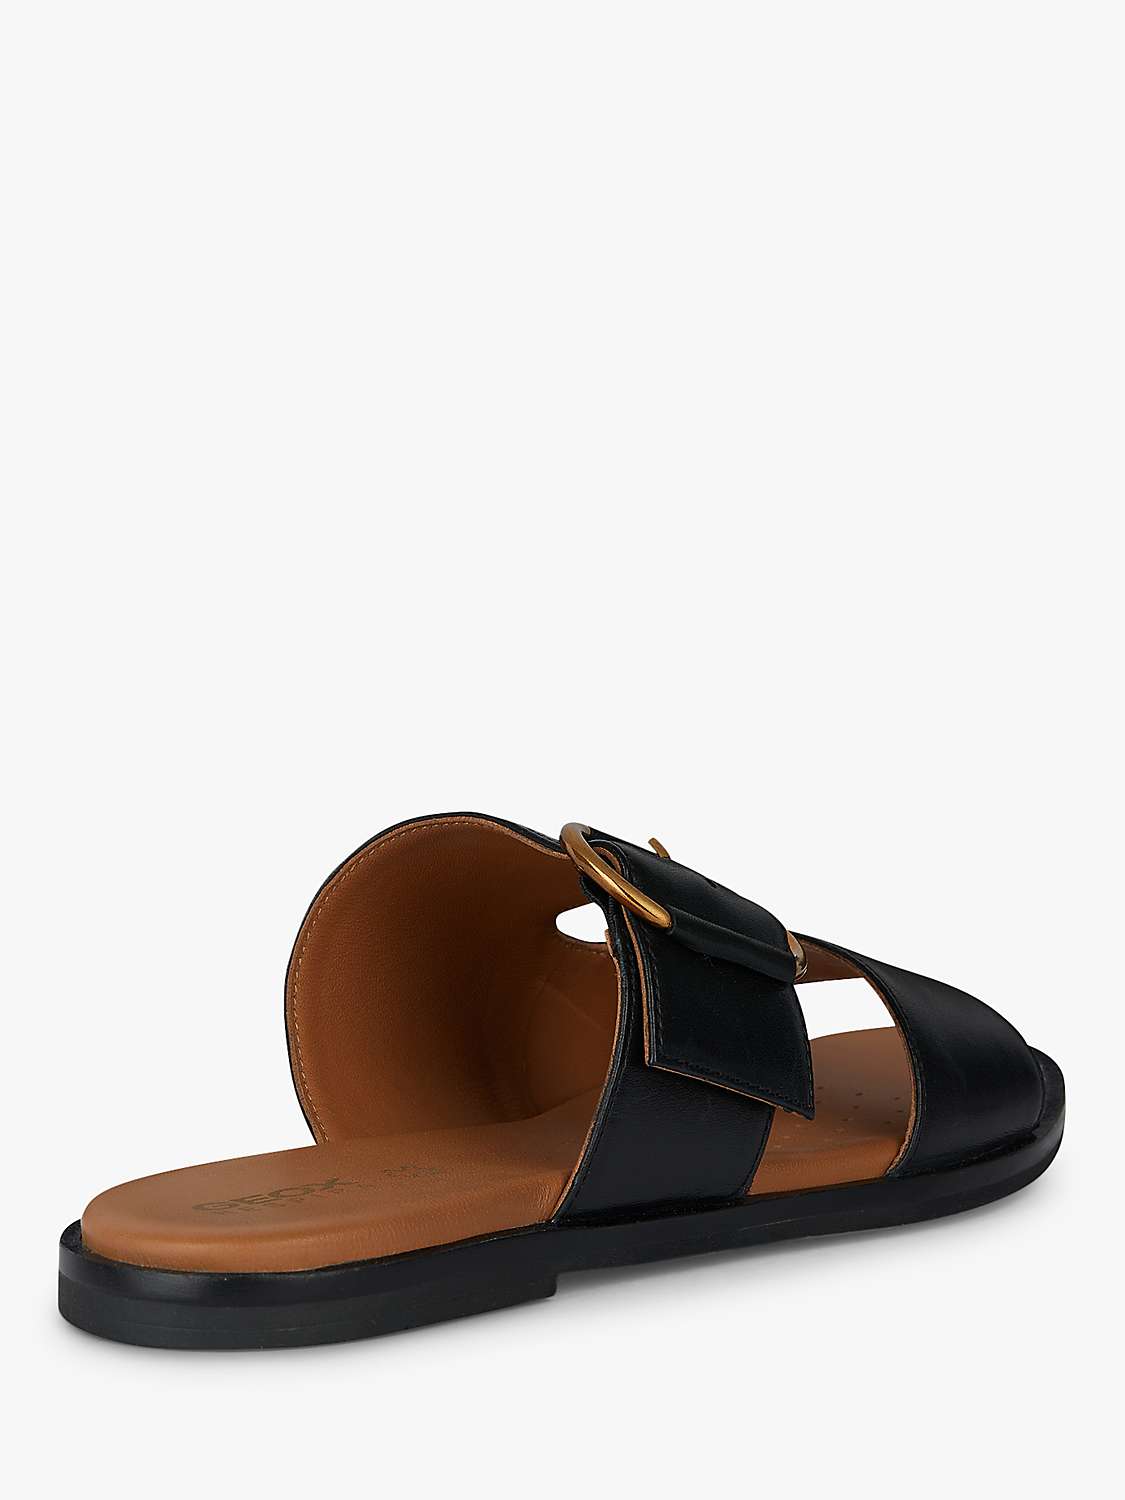 Buy Geox Naileen Leather Flat Sandals, Black Online at johnlewis.com